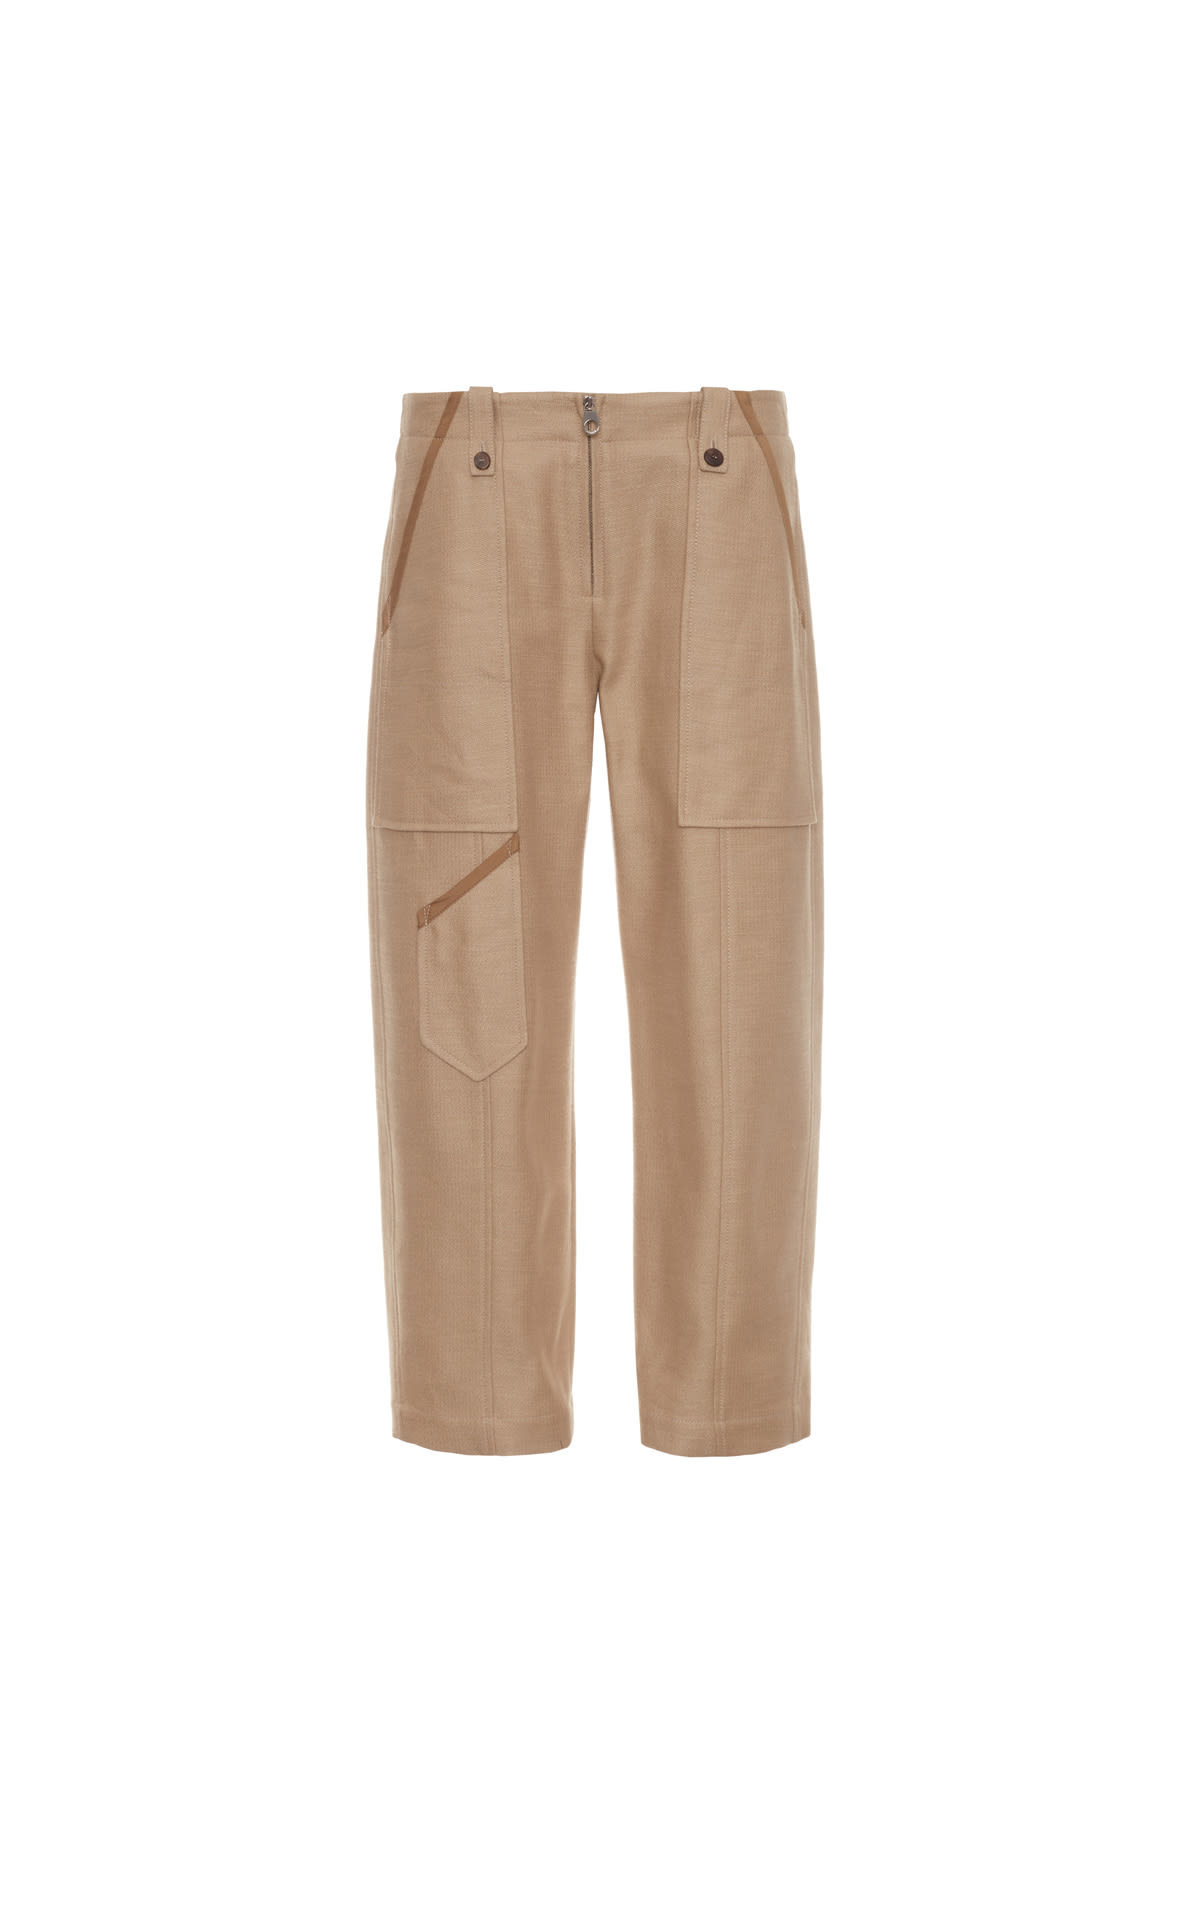 Chloé Foggy khaki trousers from Bicester Village